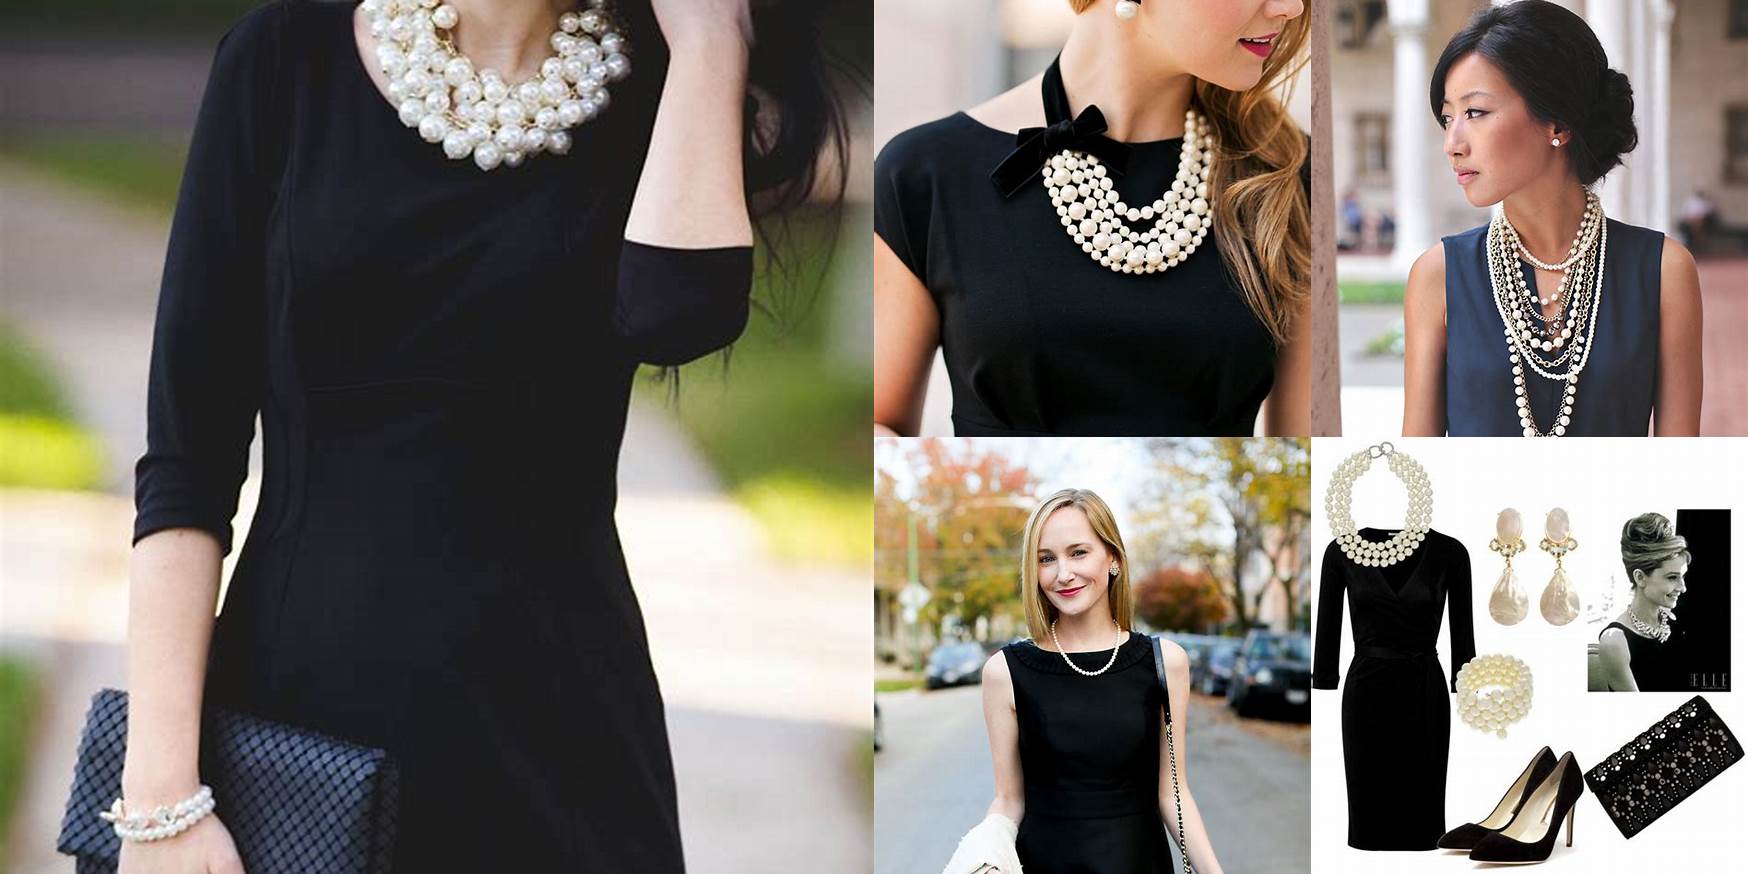 How To Wear Pearls With Black Dress